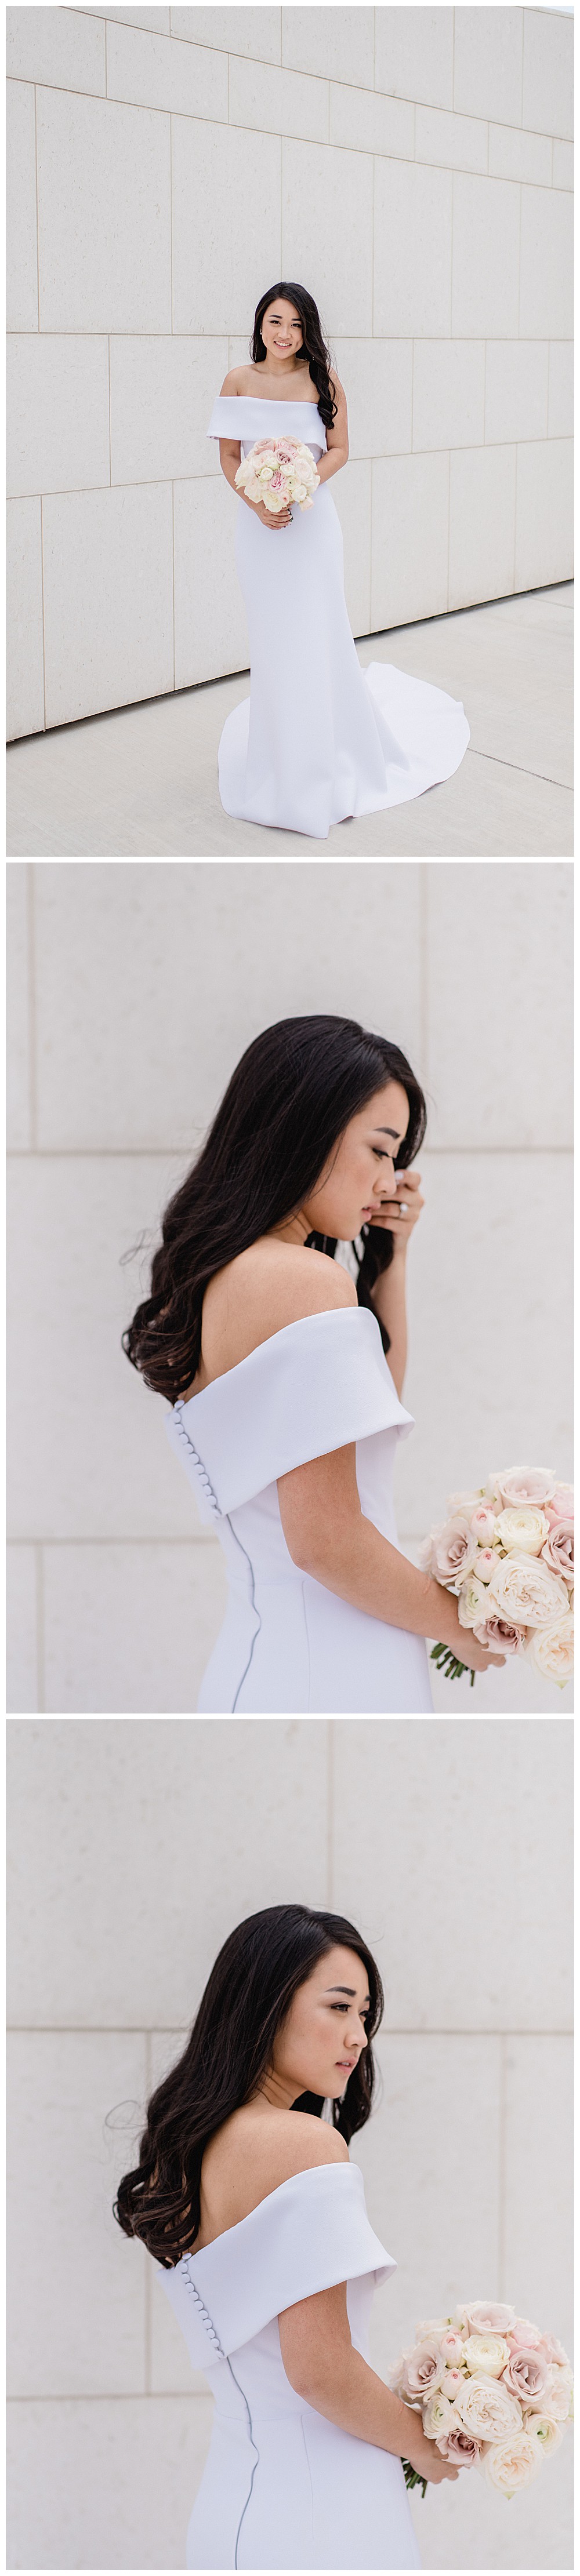 bride and groom couples editorial fashion portraits romantic whimsical emotional first look aga khan museum downtown toronto modern romantic wedding jacqueline james photography